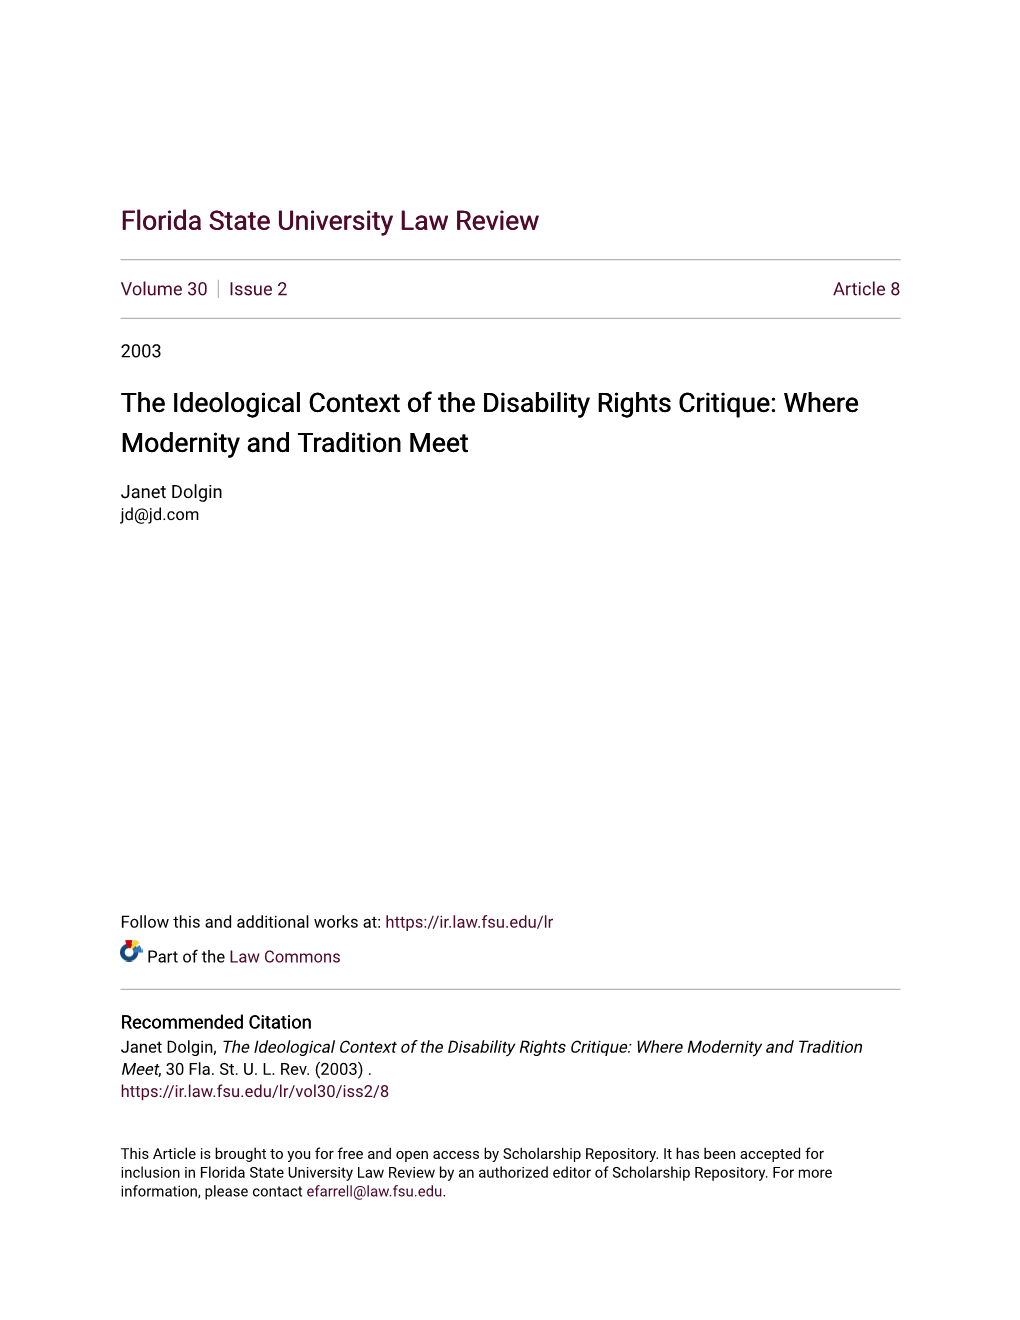 The Ideological Context of the Disability Rights Critique: Where Modernity and Tradition Meet